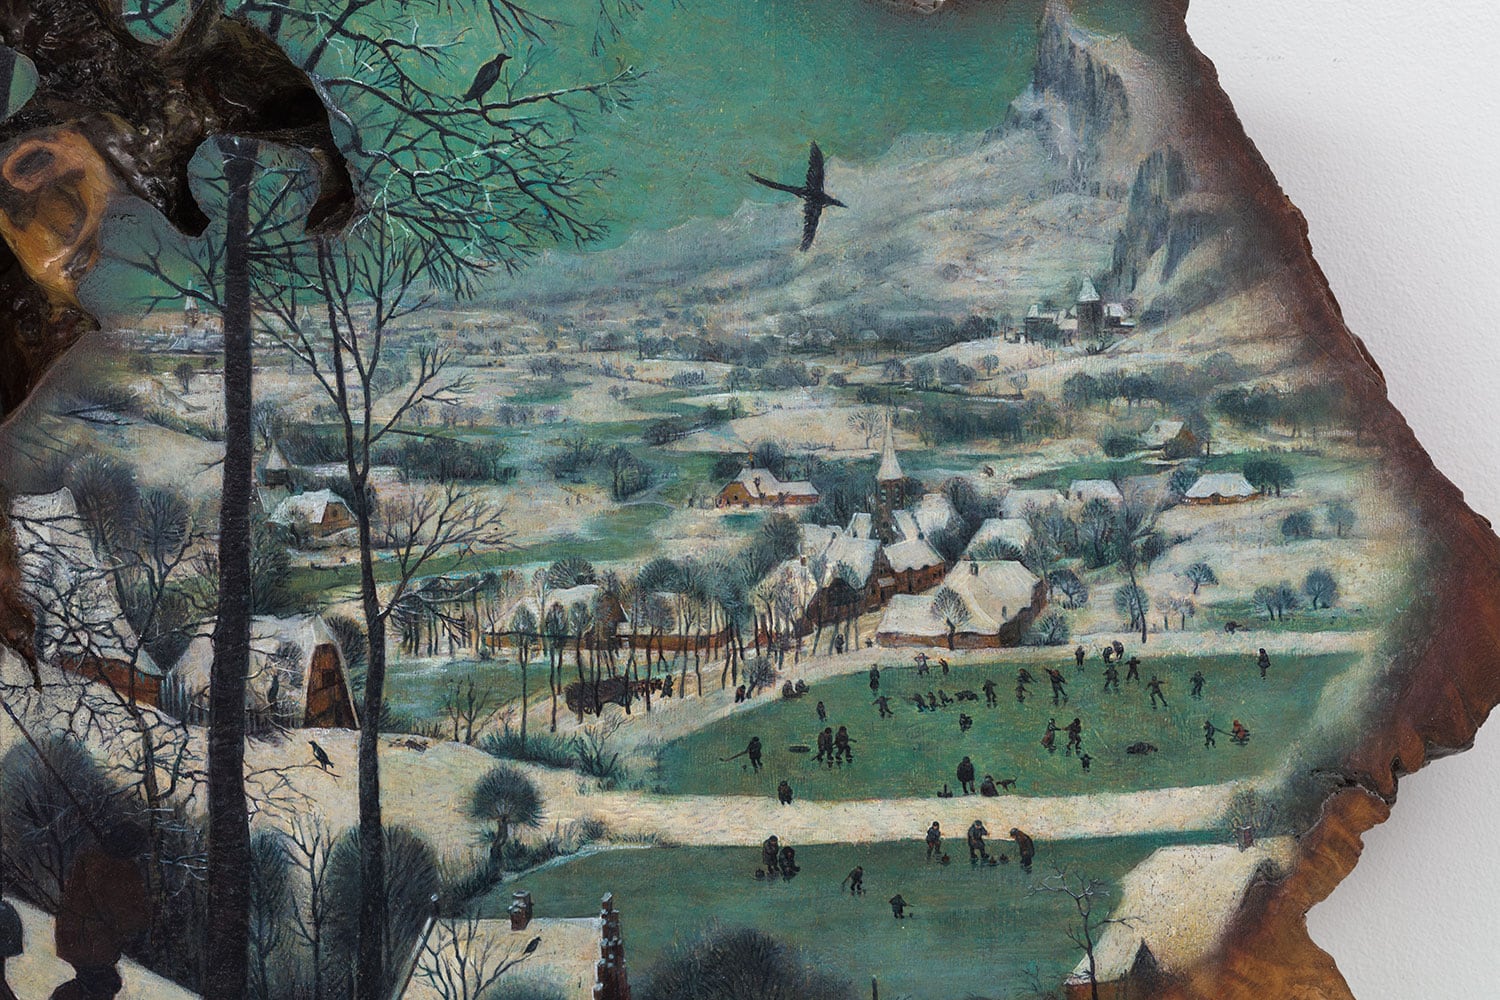 a detail image of people ice skating in a painting on a woodcut